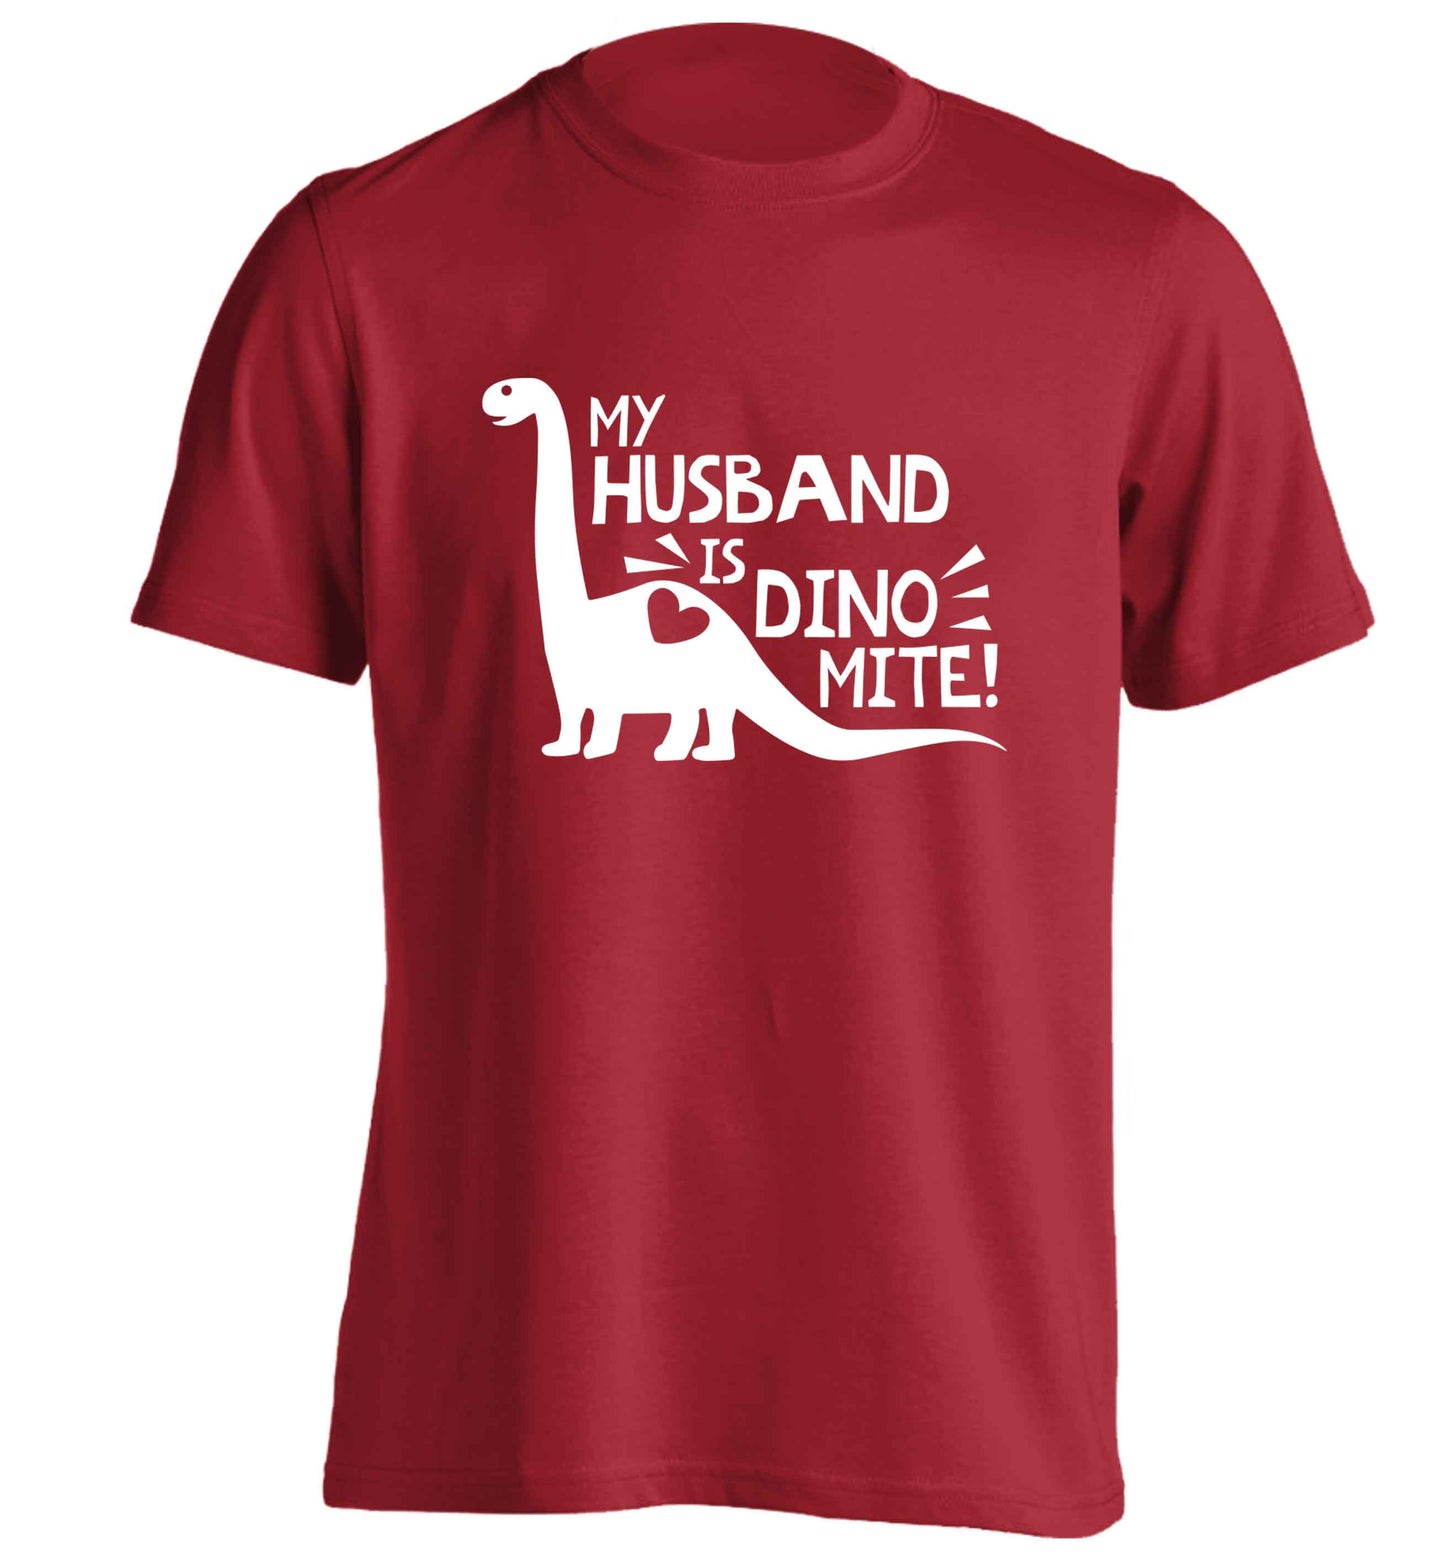 My husband is dinomite! adults unisex red Tshirt 2XL